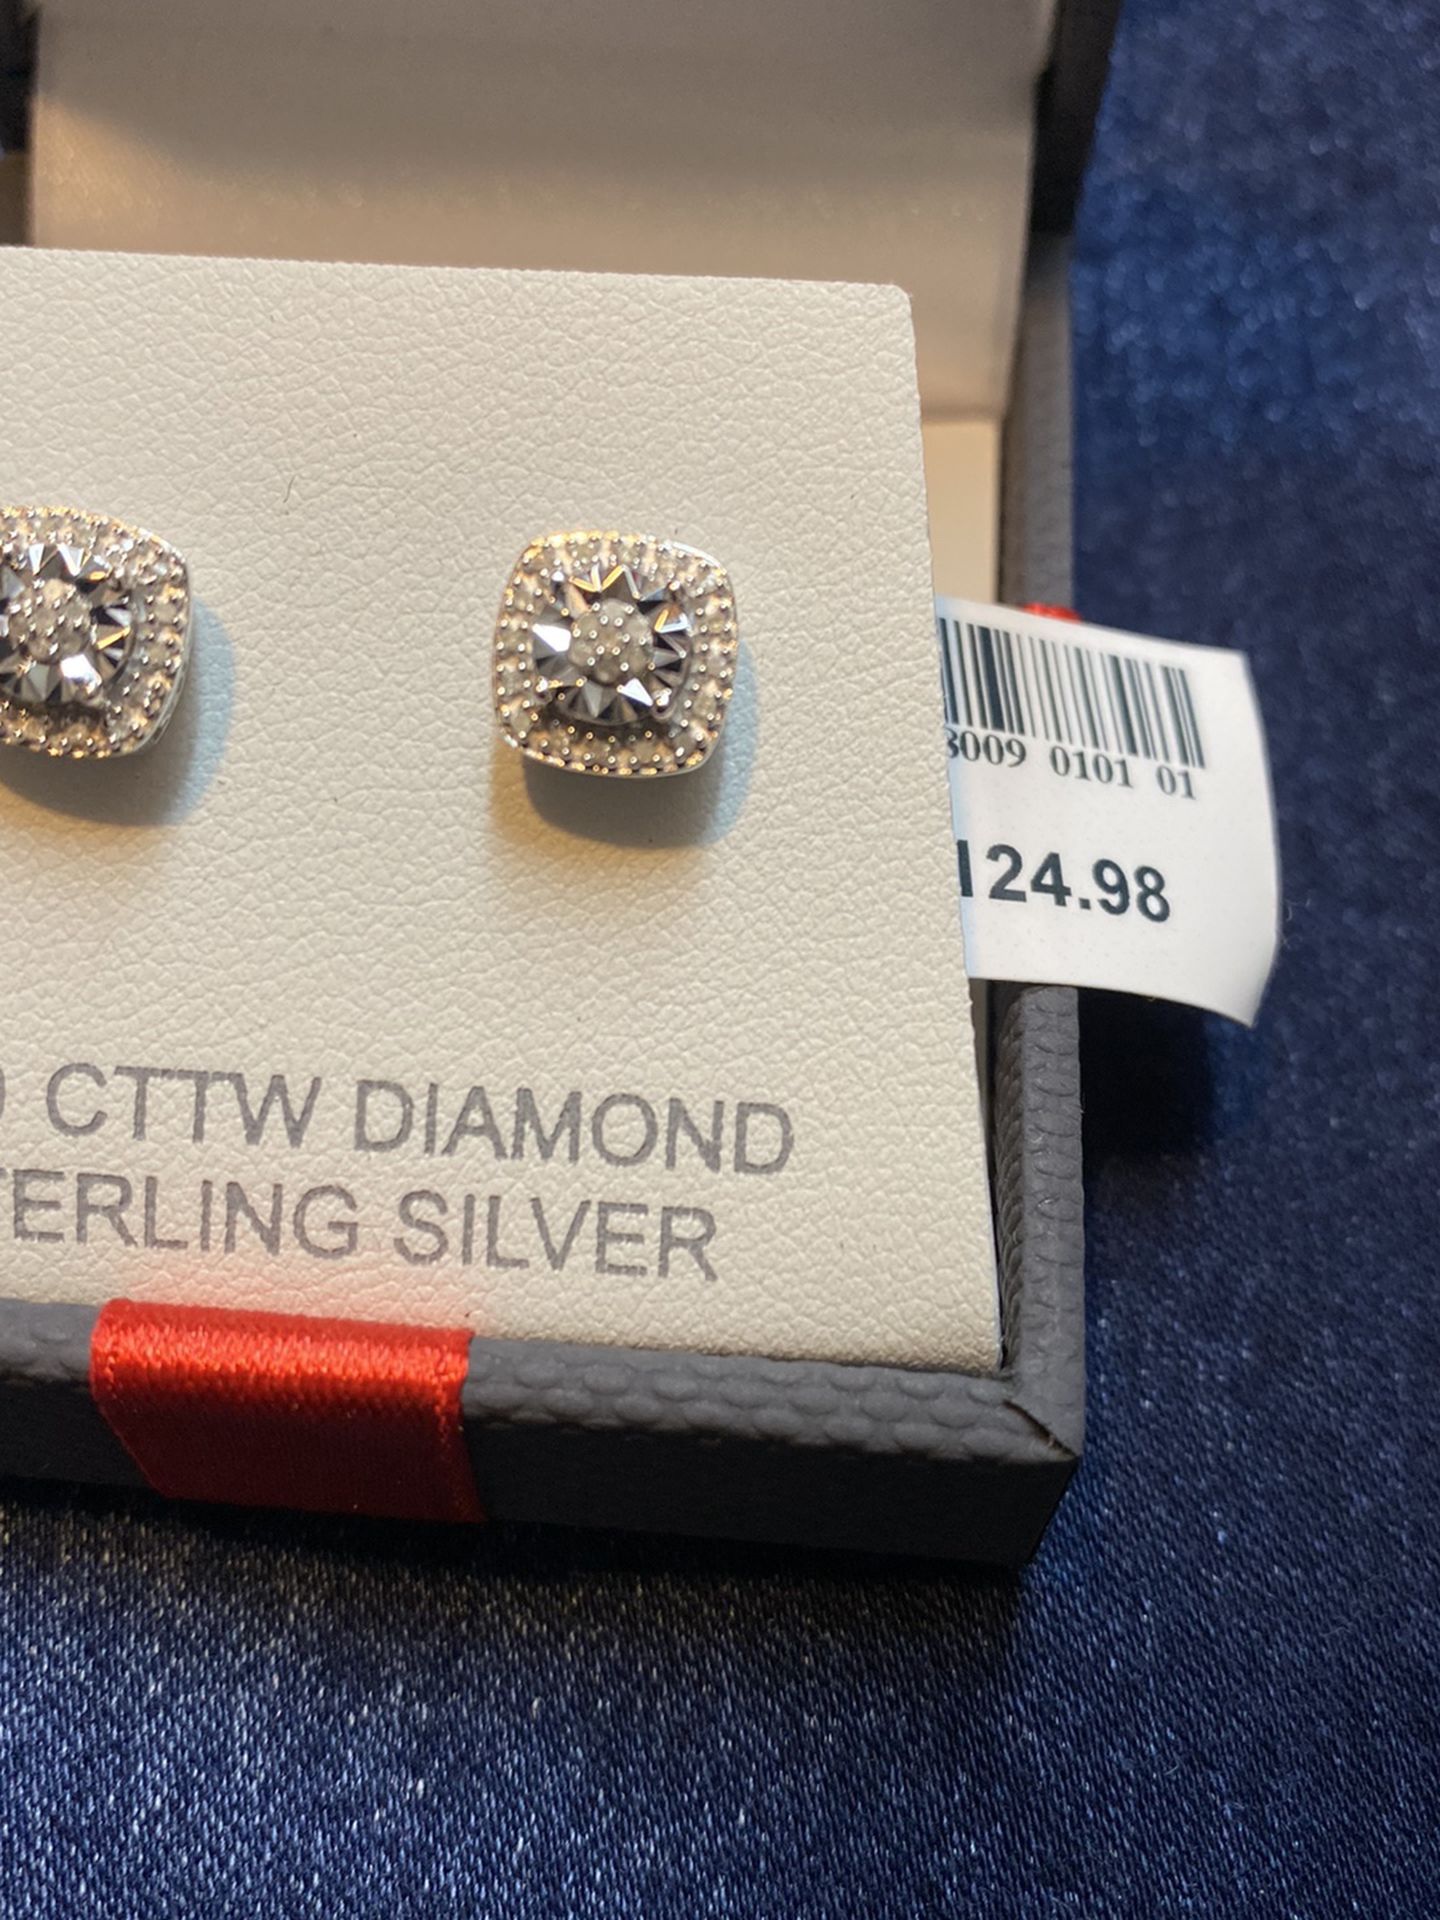 1/10 CTTW Diamond Stud Earrings Sterling Silver 100% Authentic 